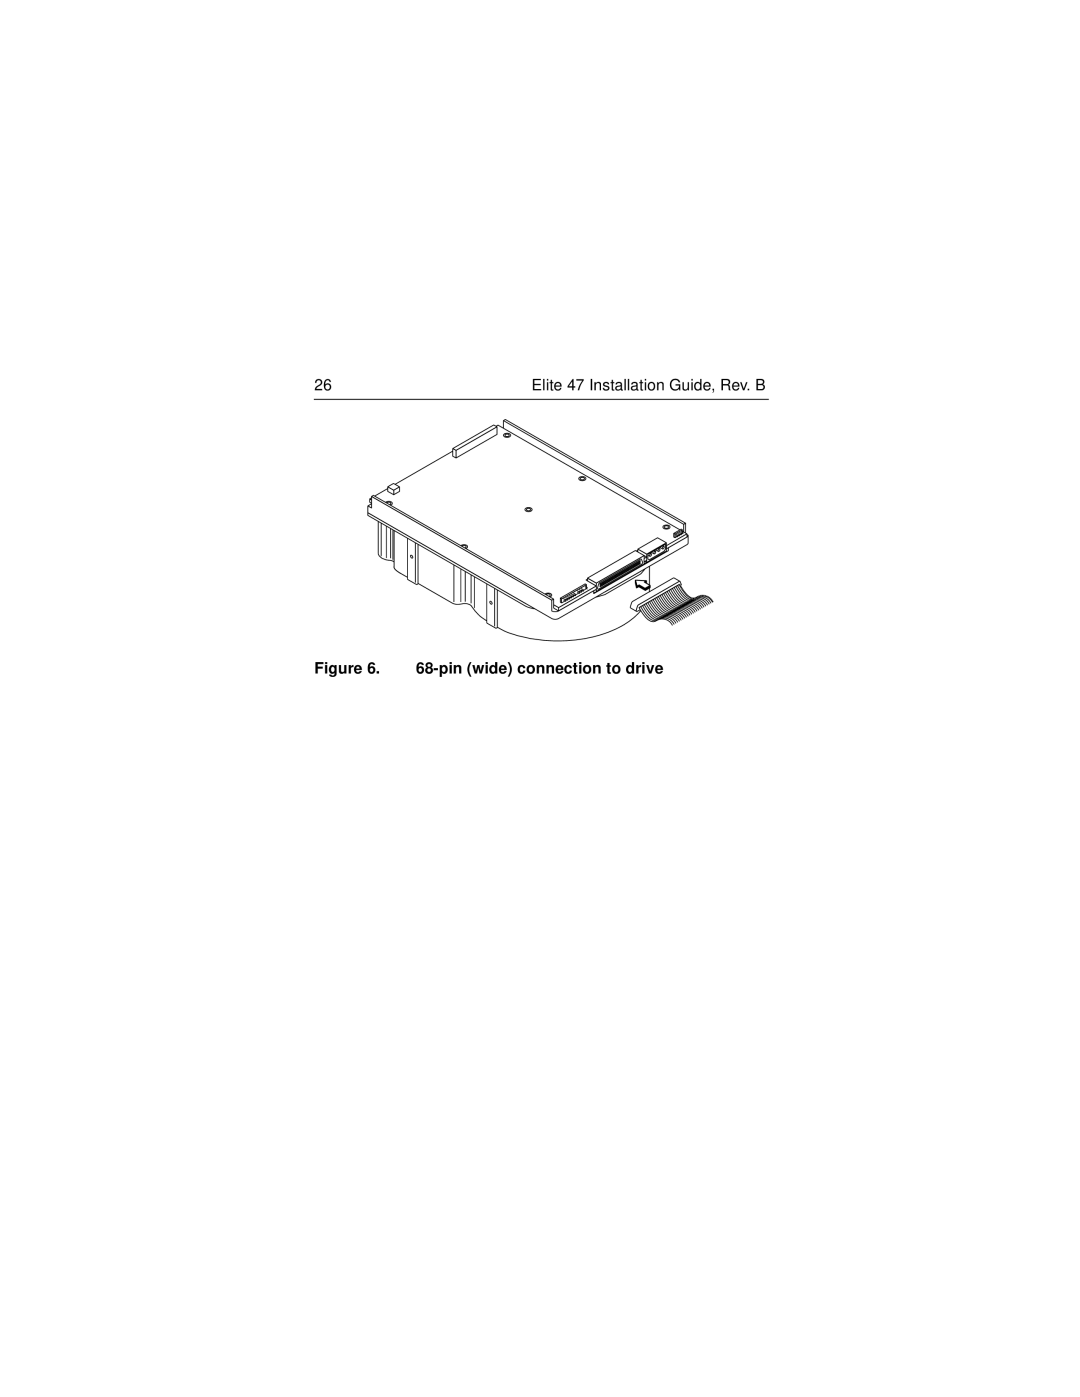 Seagate ST446452W manual 68-pin wide connection to drive, Elite 47 Installation Guide, Rev. B 